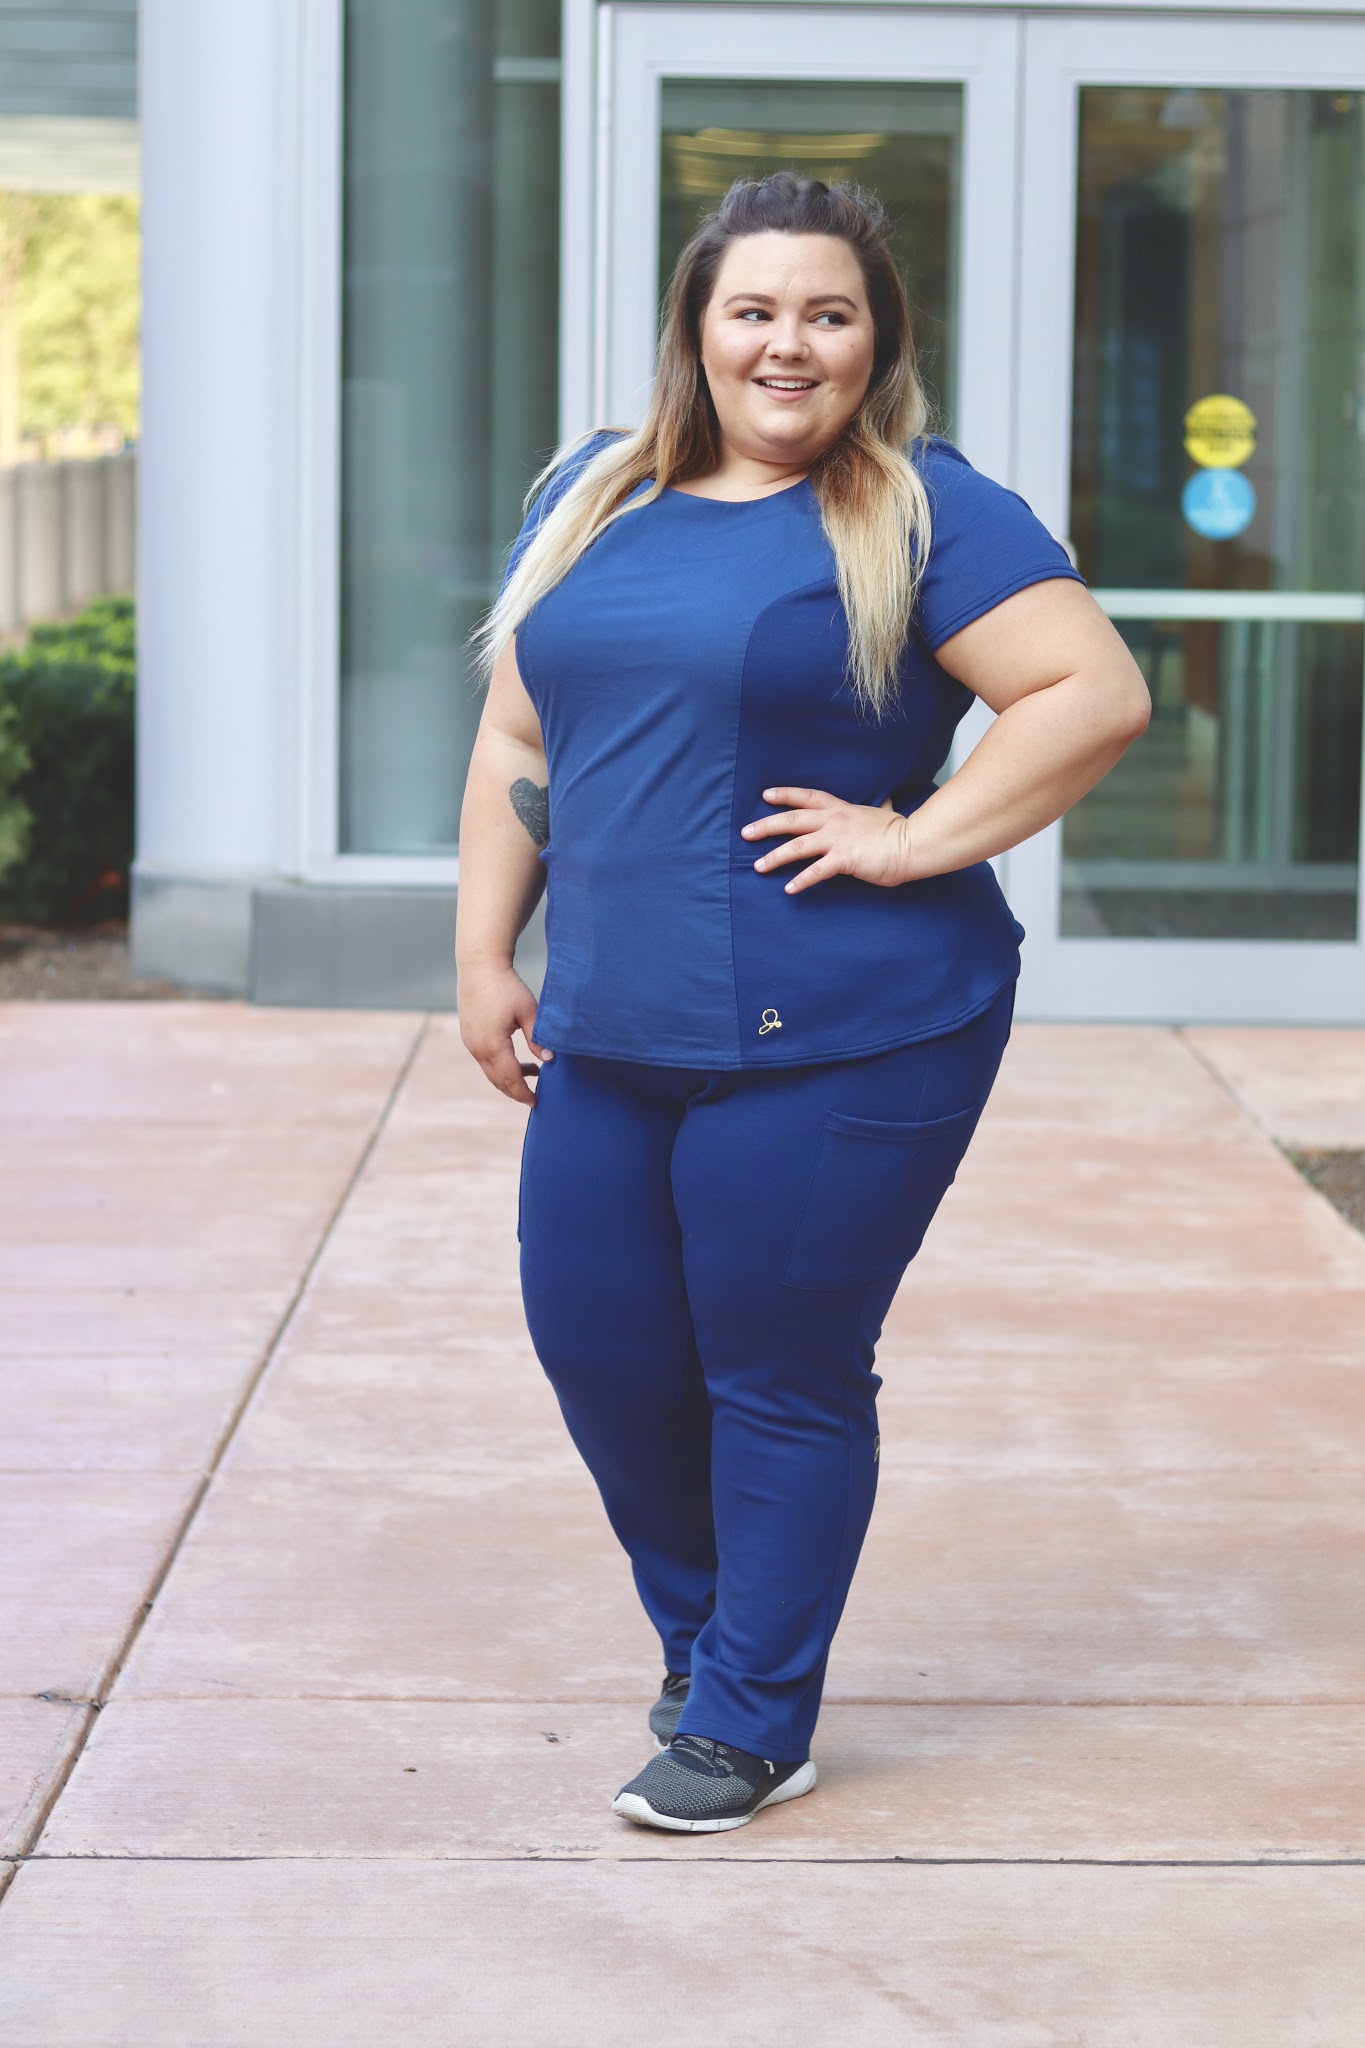 plus size scrubs, plus size medical apparel, affordable plus size clothing, natalie in the city, natalie craig, plus size fashion, Chicago plus size fashion blogger